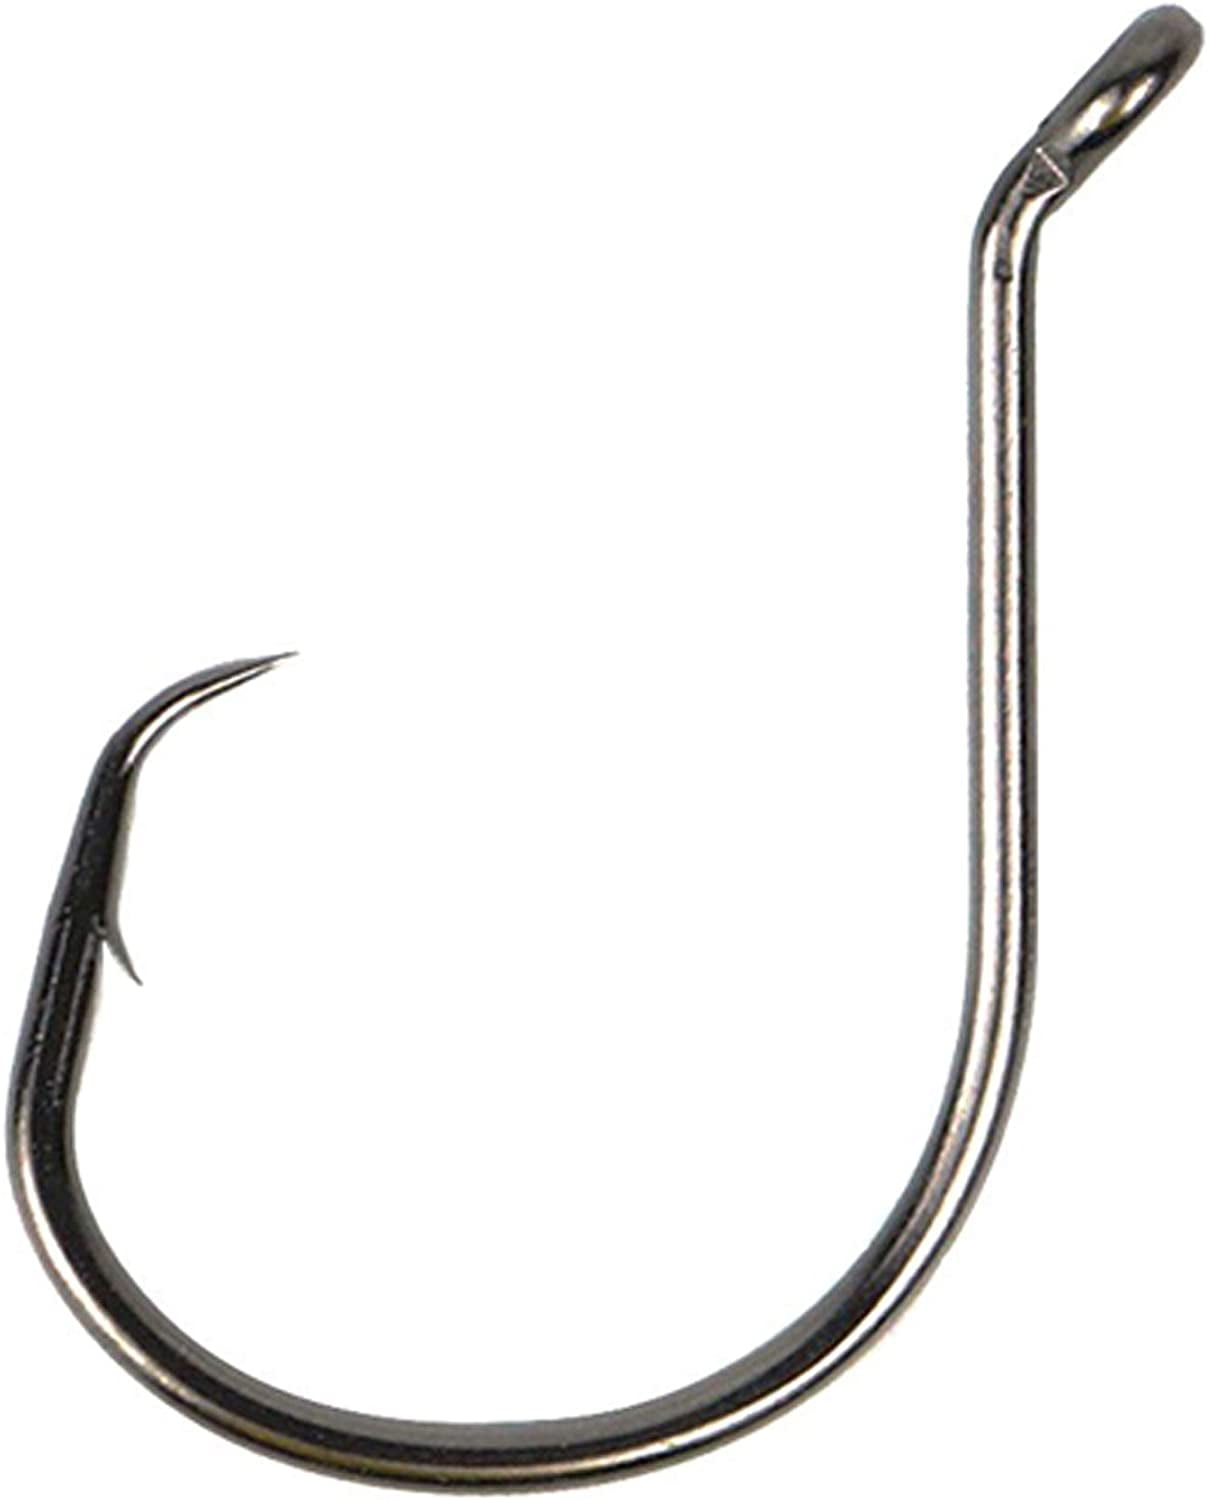 Stellar UltraPoint Wide Gap 4/0 (10 Pack) Circle Hook, Offset Circle Extra  Fine Wire Hook for Catfish, Carp, Bluegill to Tuna. Saltwater or Freshwater Fishing  Hooks, Gear and Equipment 